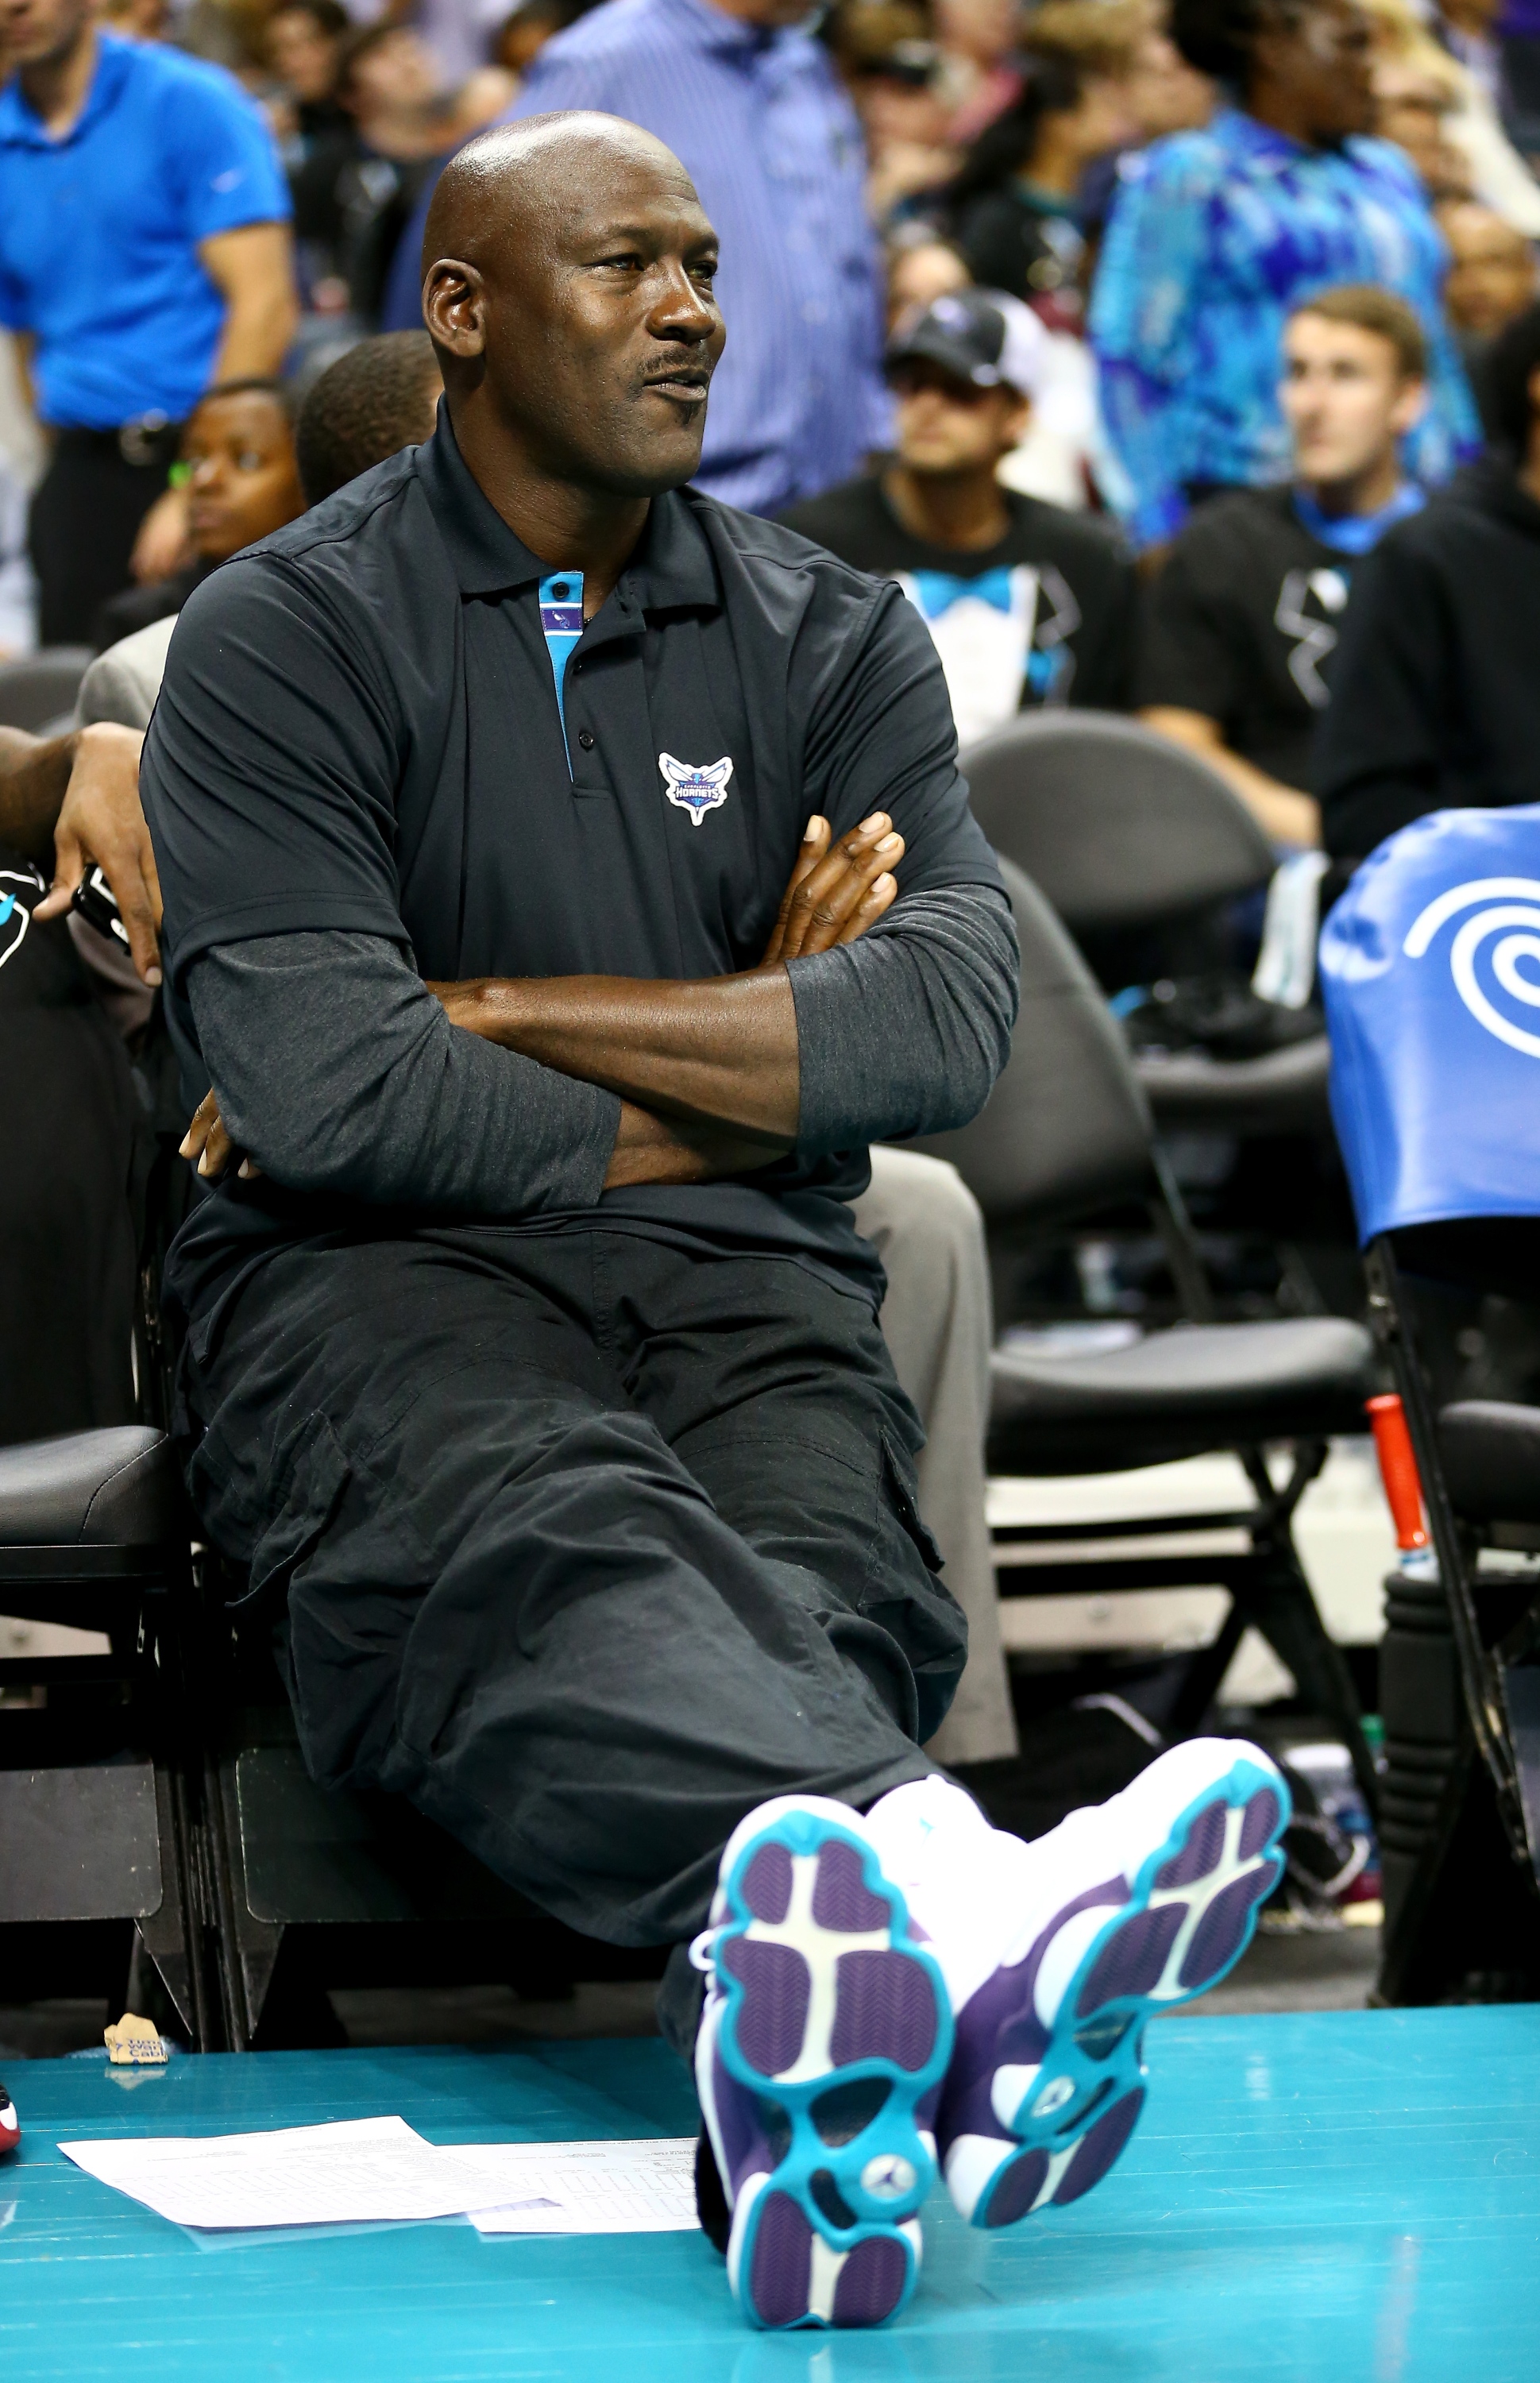 CHARLOTTE, NC - OCTOBER 29:  Michael Jordan, owner of the Charlotte Hornets, watches on during their game against the Milwaukee Bucks at Time Warner Cable Arena on October 29, 2014 in Charlotte, North Carolina.  The Charlotte Hornets defeated the Milwaukee Bucks 108-106 in overtime. NOTE TO USER: User expressly acknowledges and agrees that, by downloading and or using this photograph, User is consenting to the terms and conditions of the Getty Images License Agreement.  (Photo by Streeter Lecka/Getty Images)